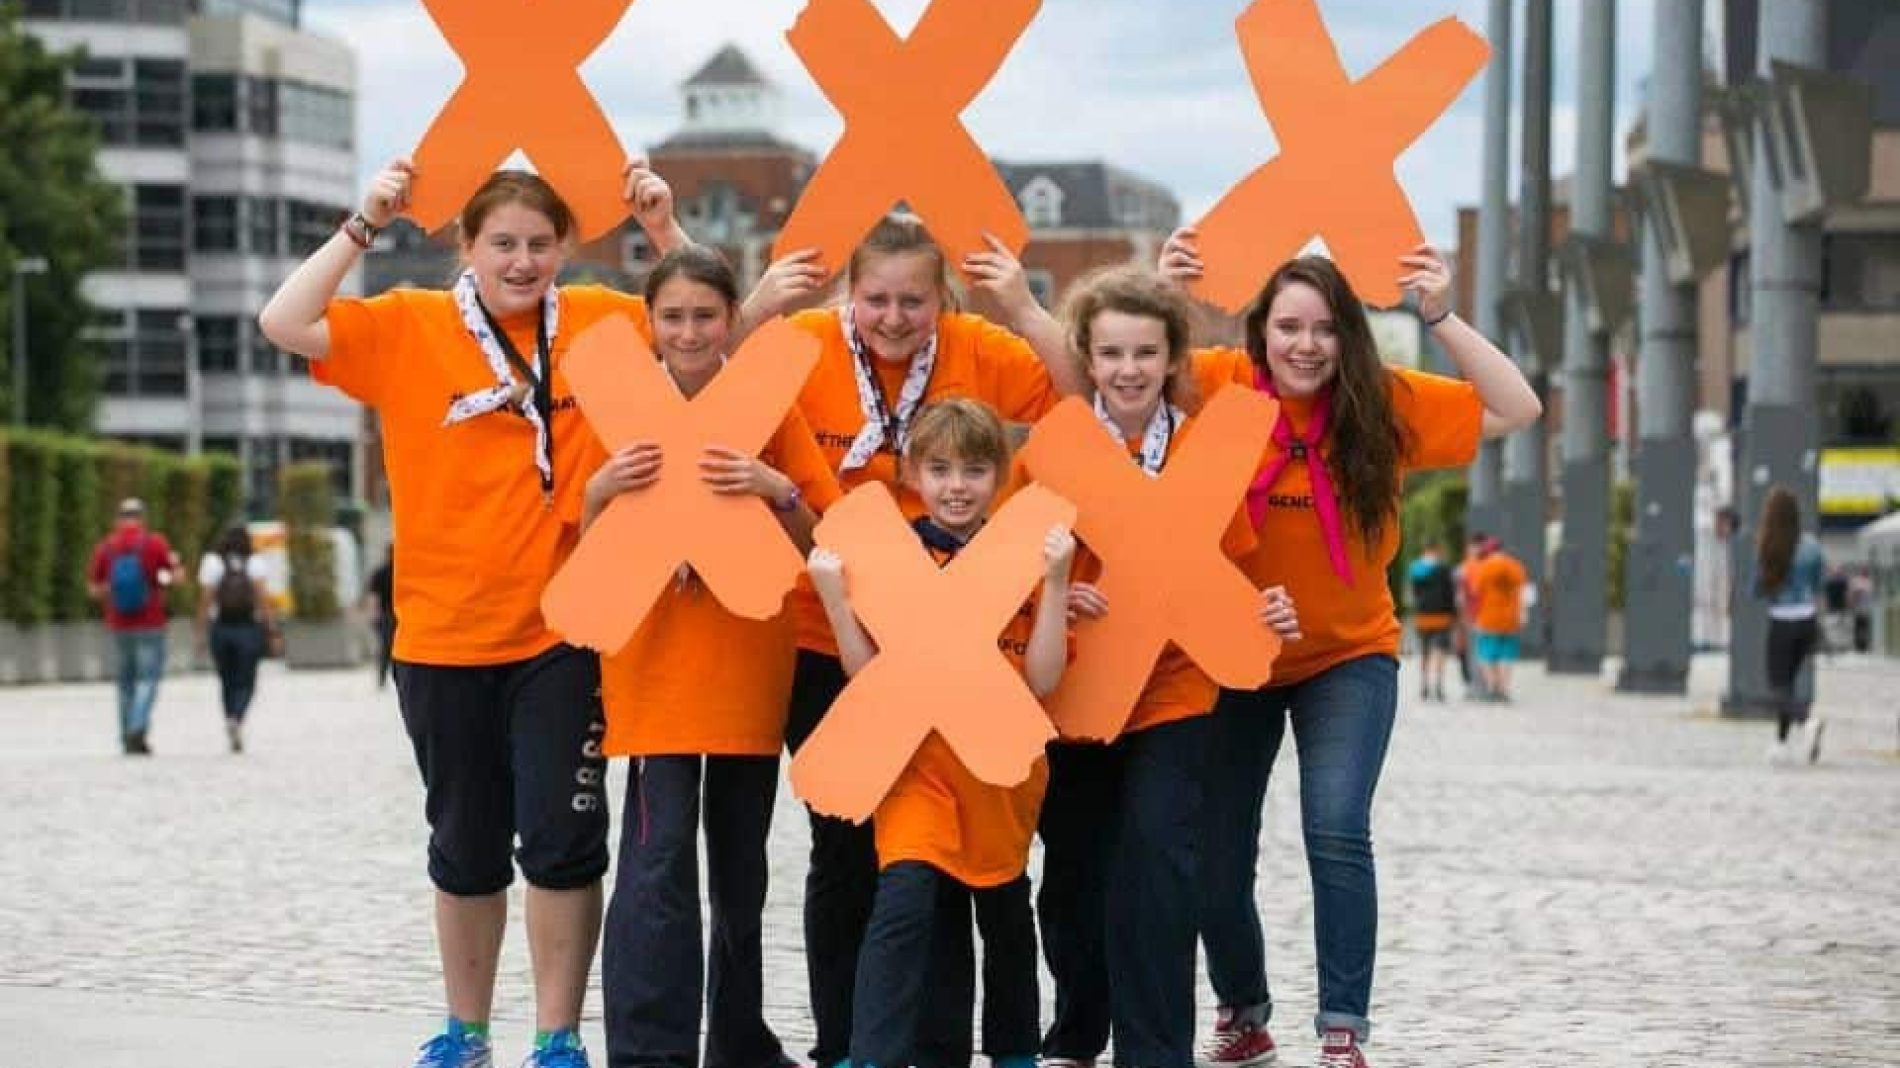 group of young people holding up x's